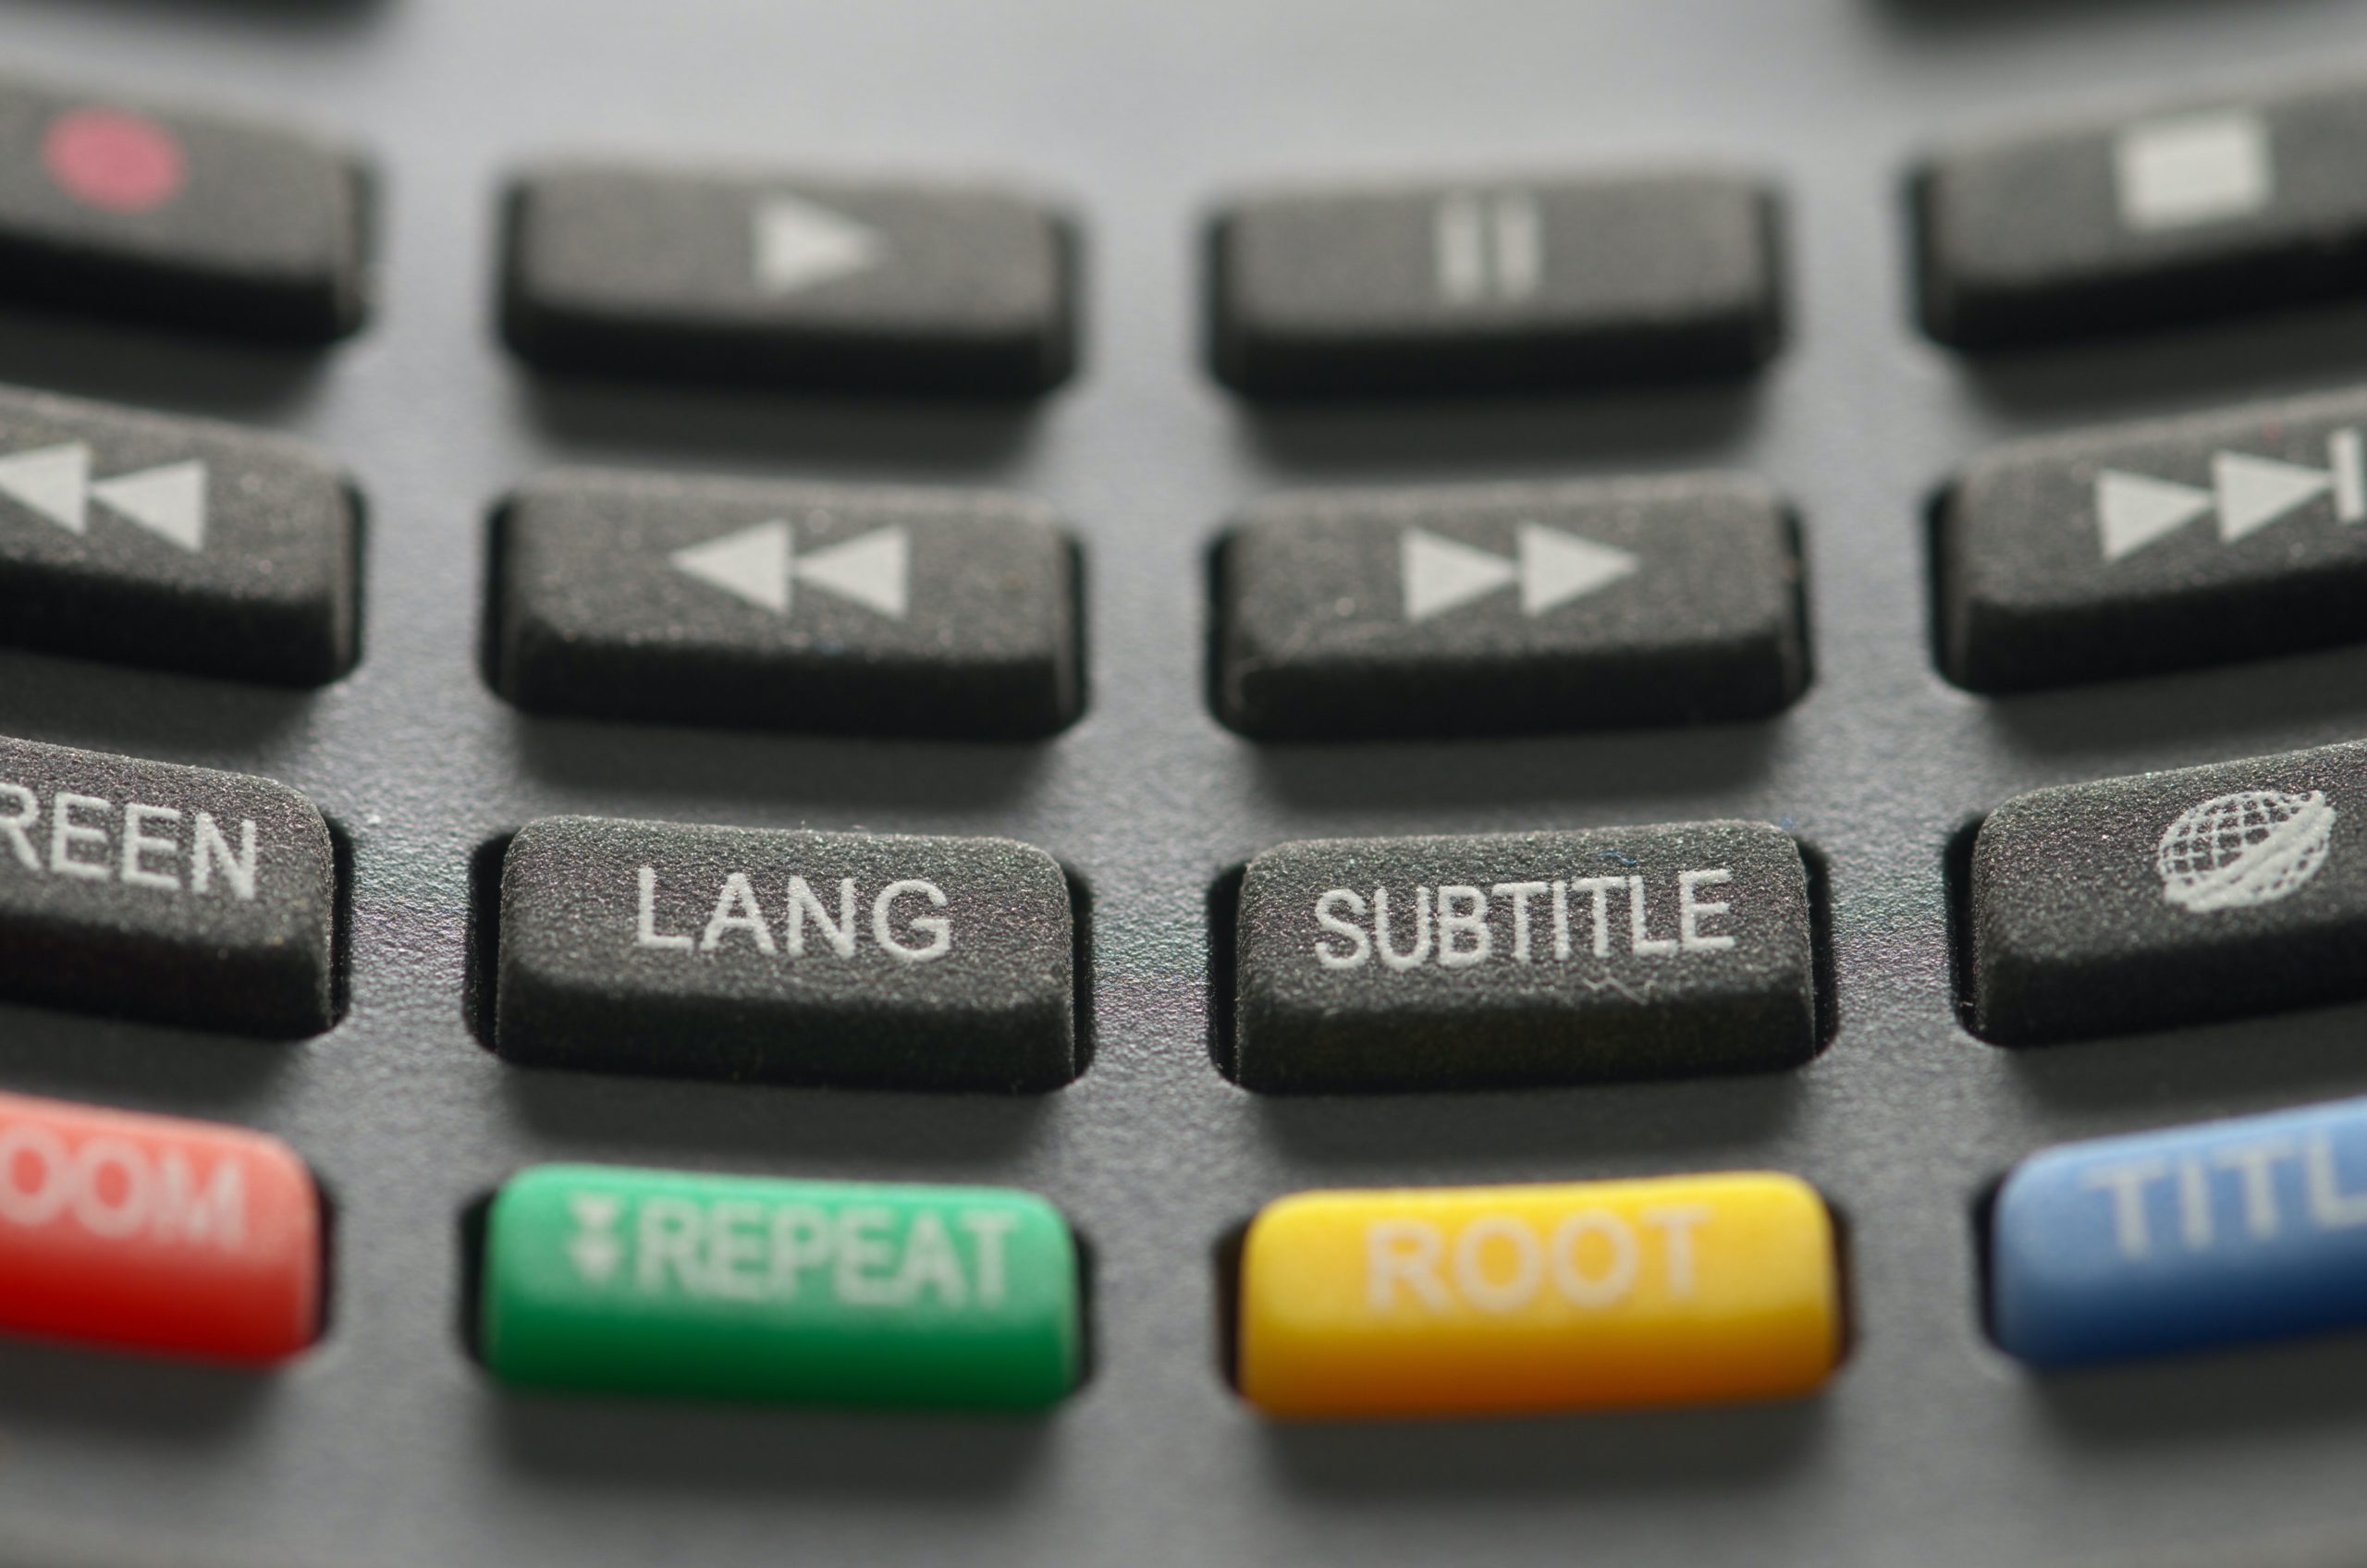 Subtitling and captioning